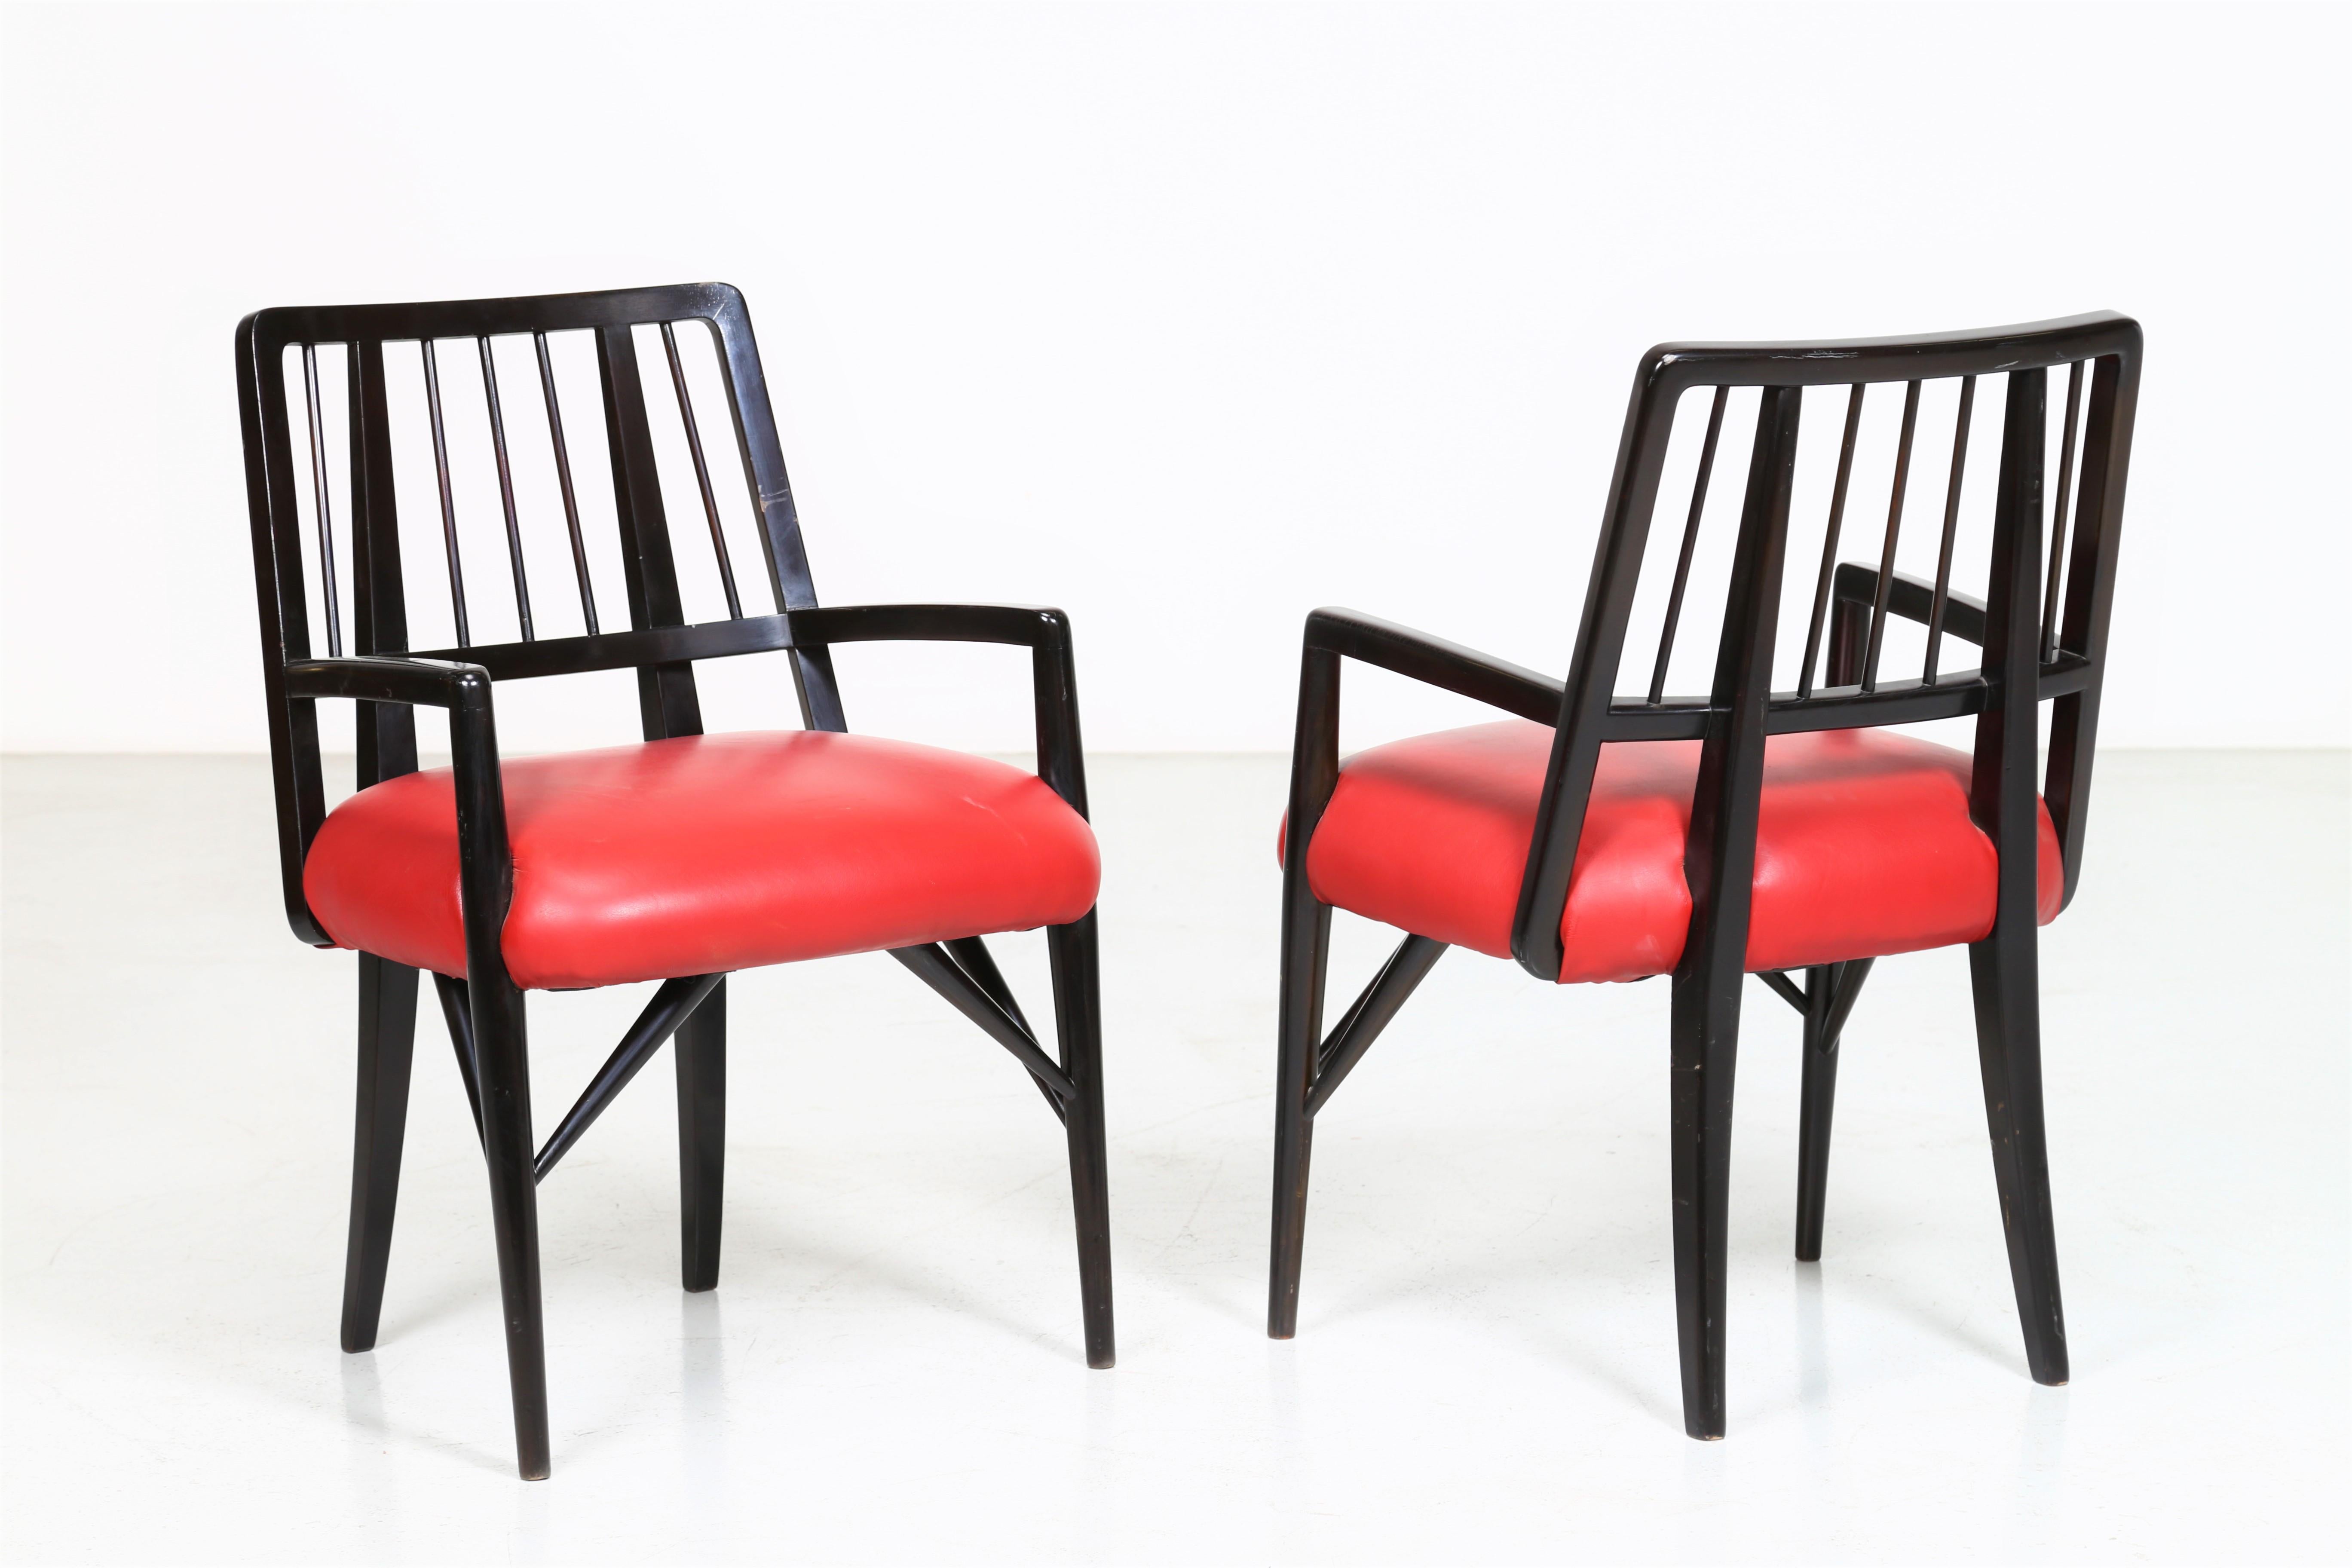 Paul Laszlo Set of Four Chairs in Black Lacquered Wood, 1950s For Sale 2